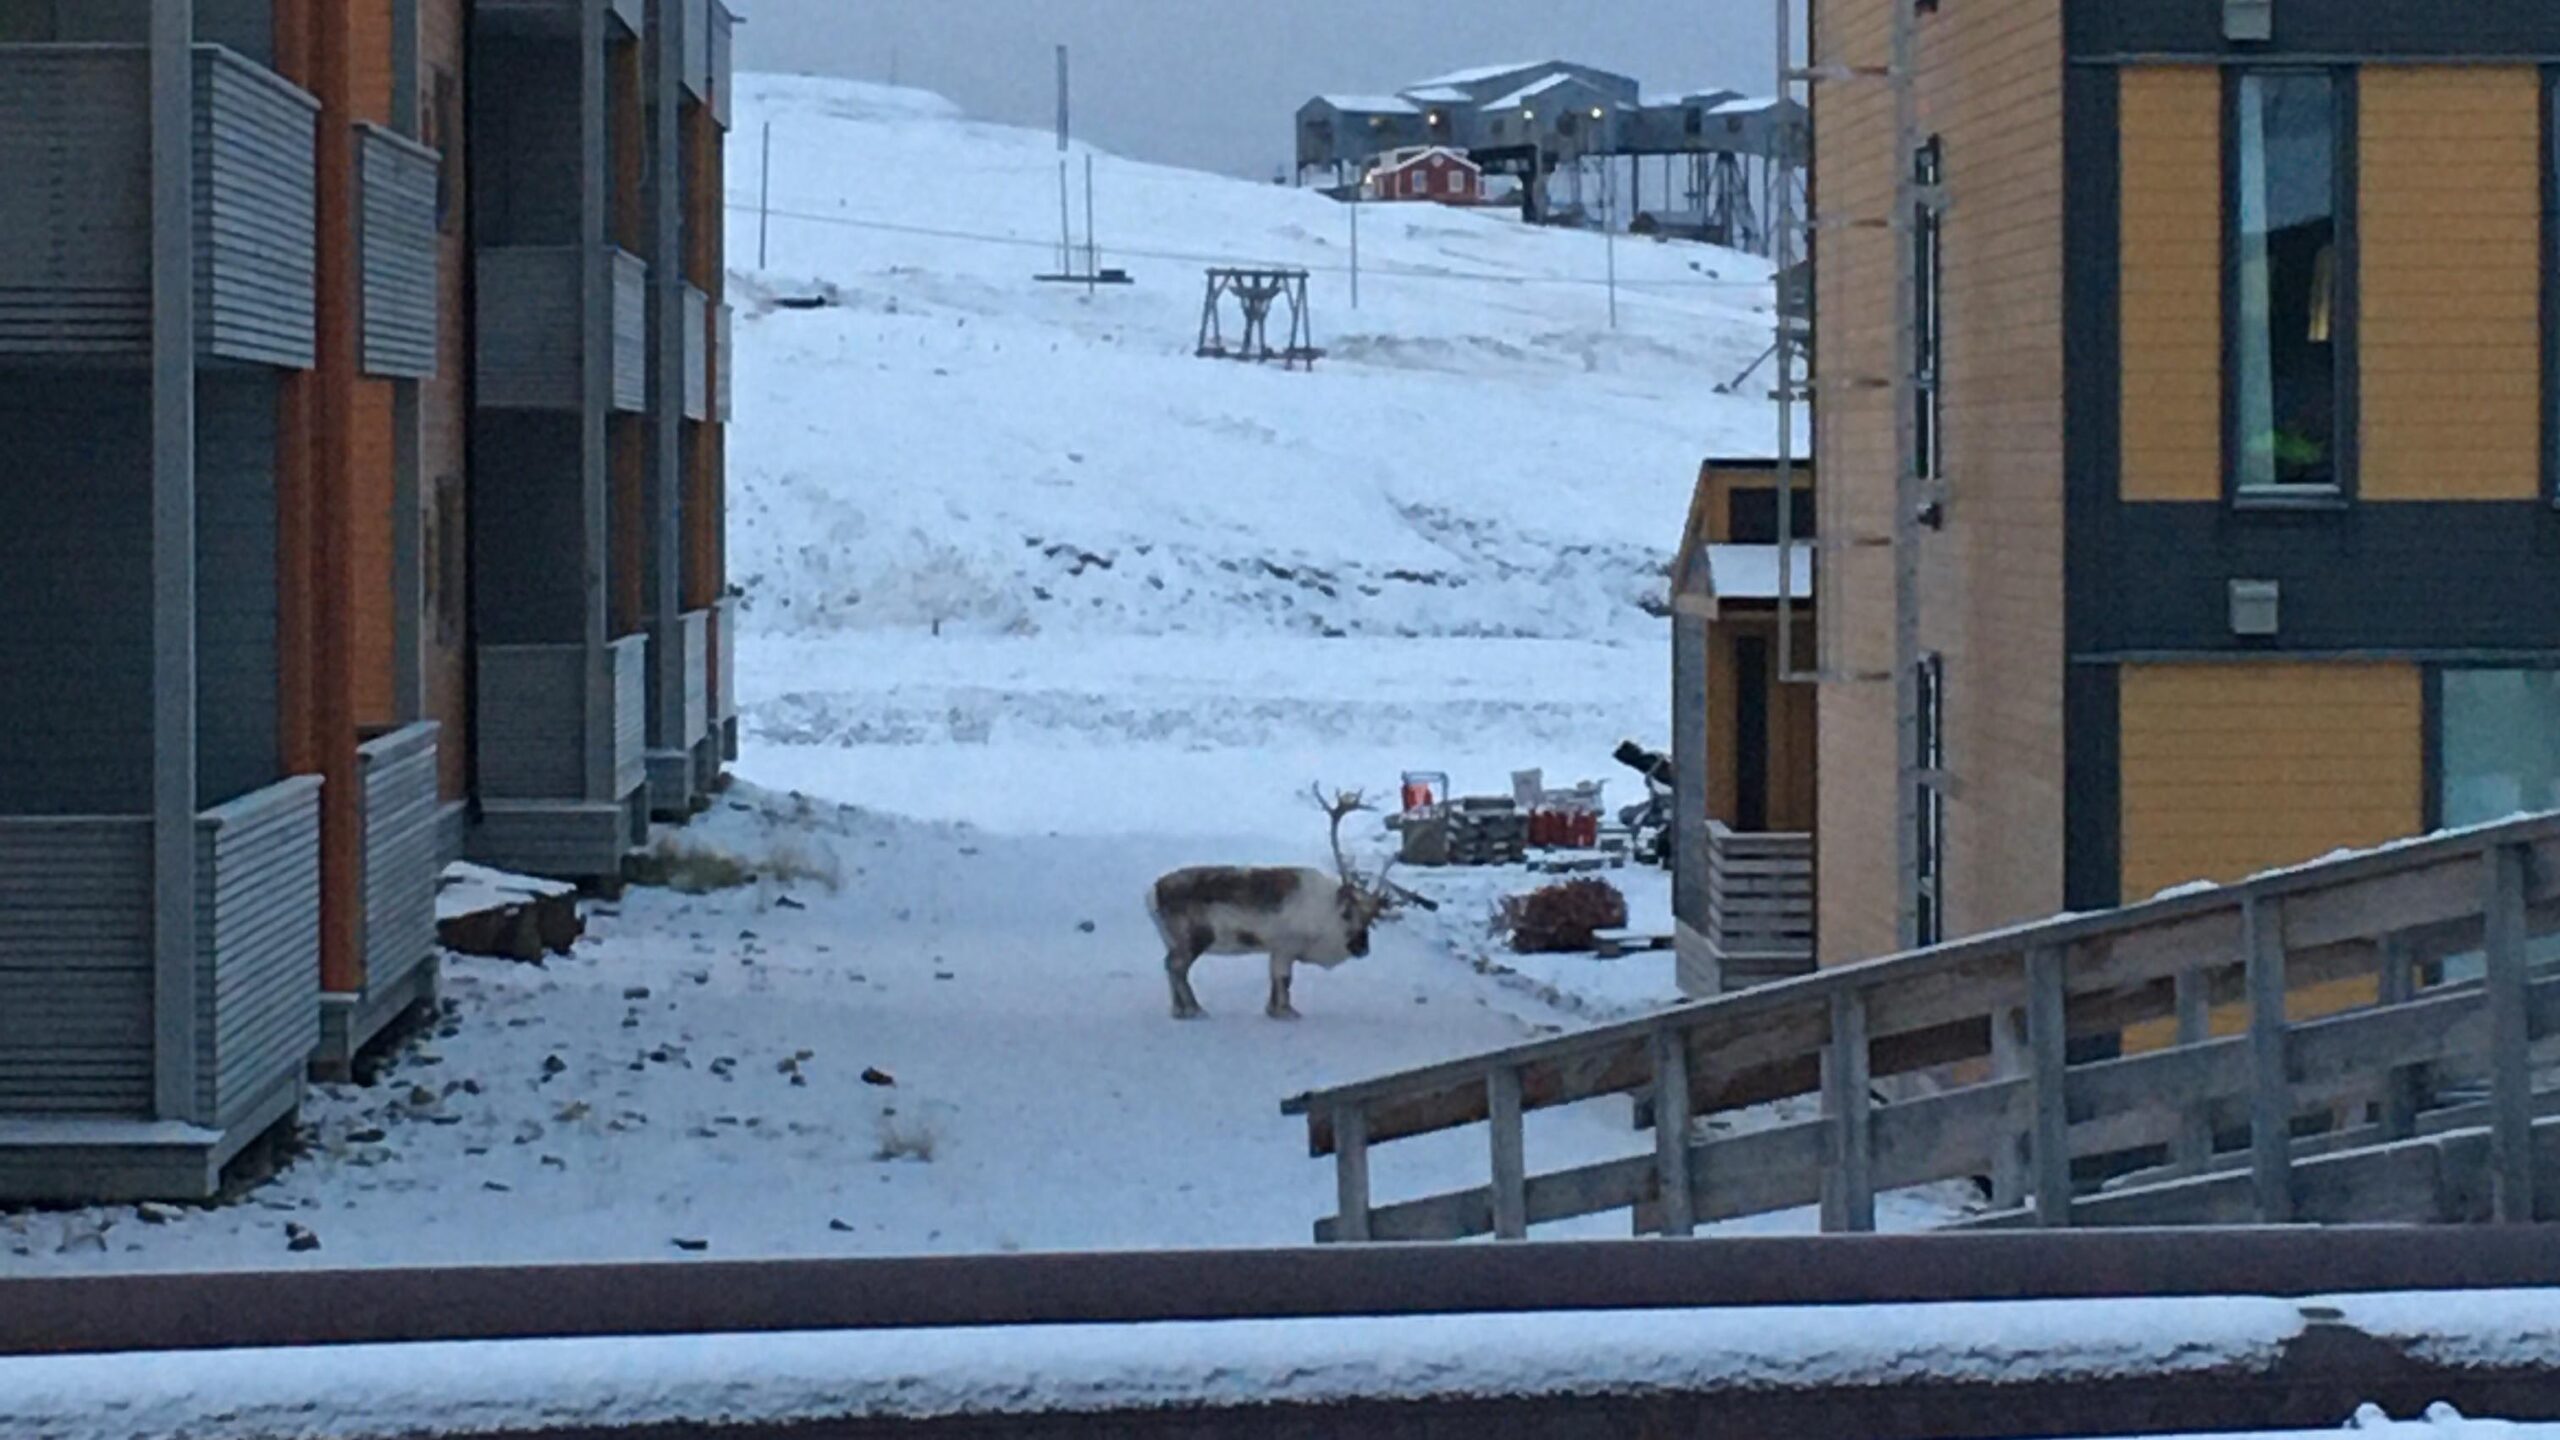 Photo: A lone reindeer is shown wandering throw a snowy, isolated town in the Arctic.